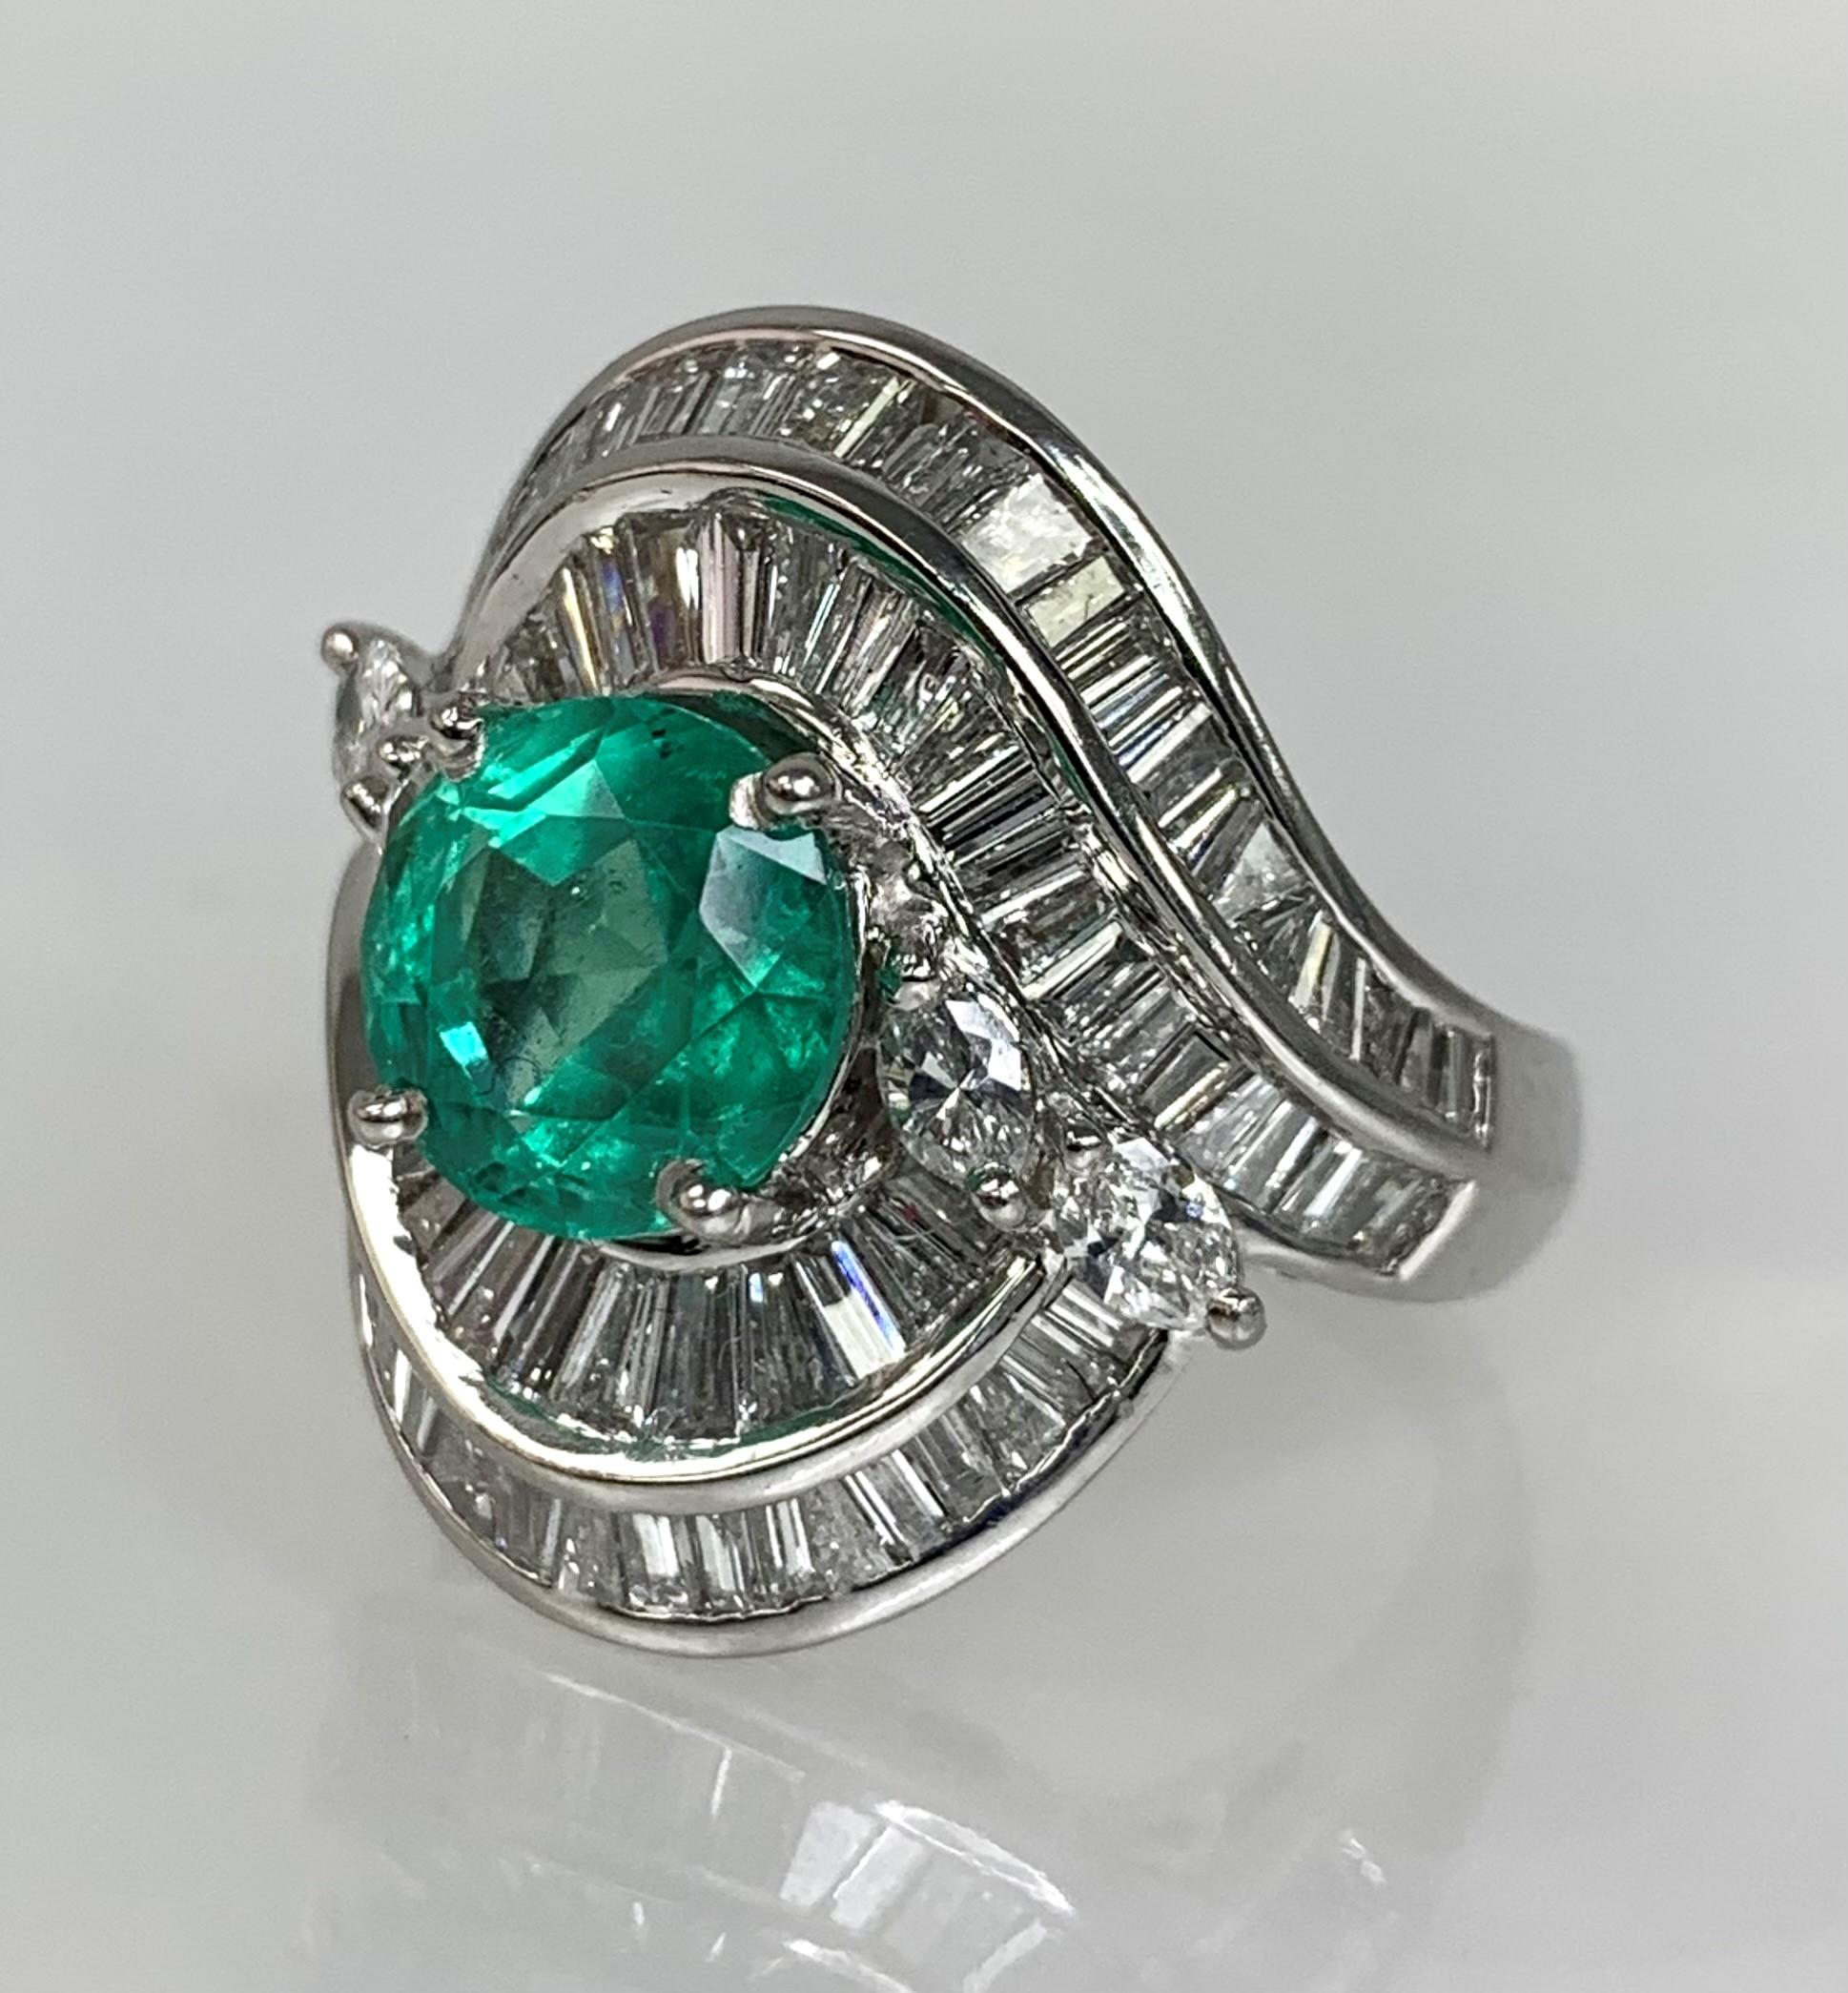 A lustrous and luxurious one of a kind vintage platinum ring featuring a round shaped emerald weighing 2.55 carats surrounded by a medley of multi shaped: baguette, princess cut and round sparkling white diamonds weighing a total of 2.67